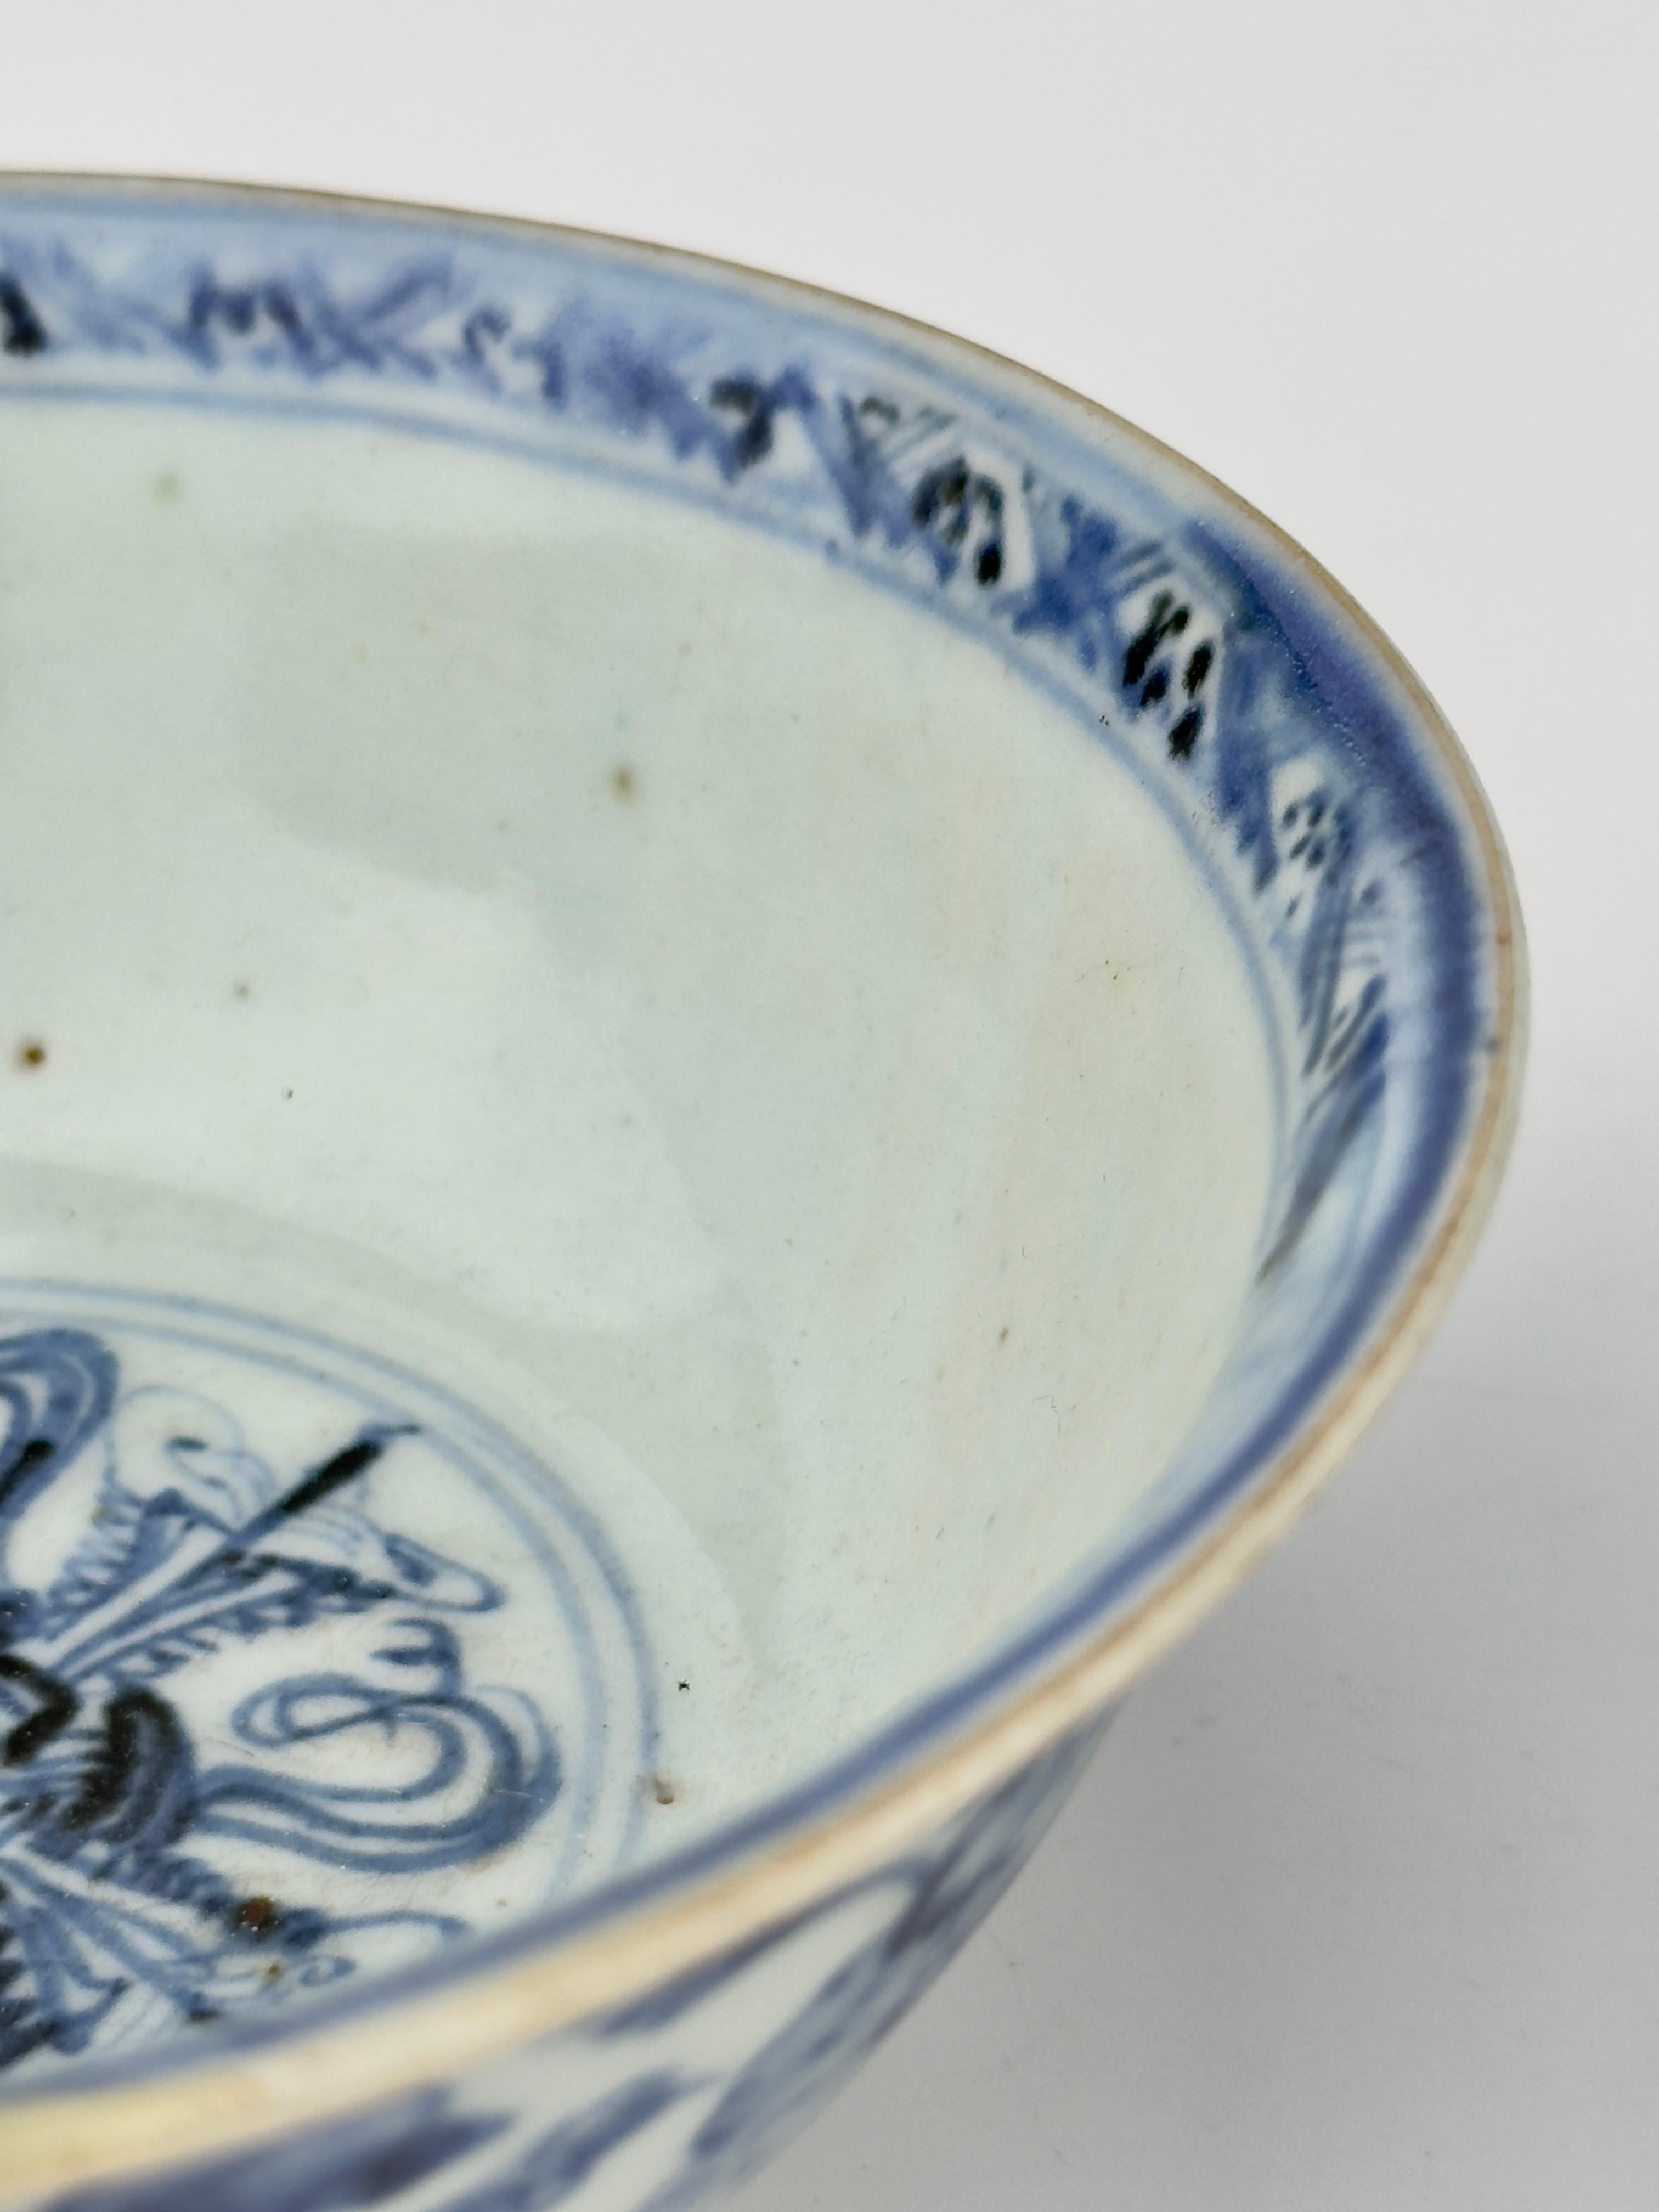 Two Bowls with knot shaped design on inside, Ming Era(15th century) For Sale 3